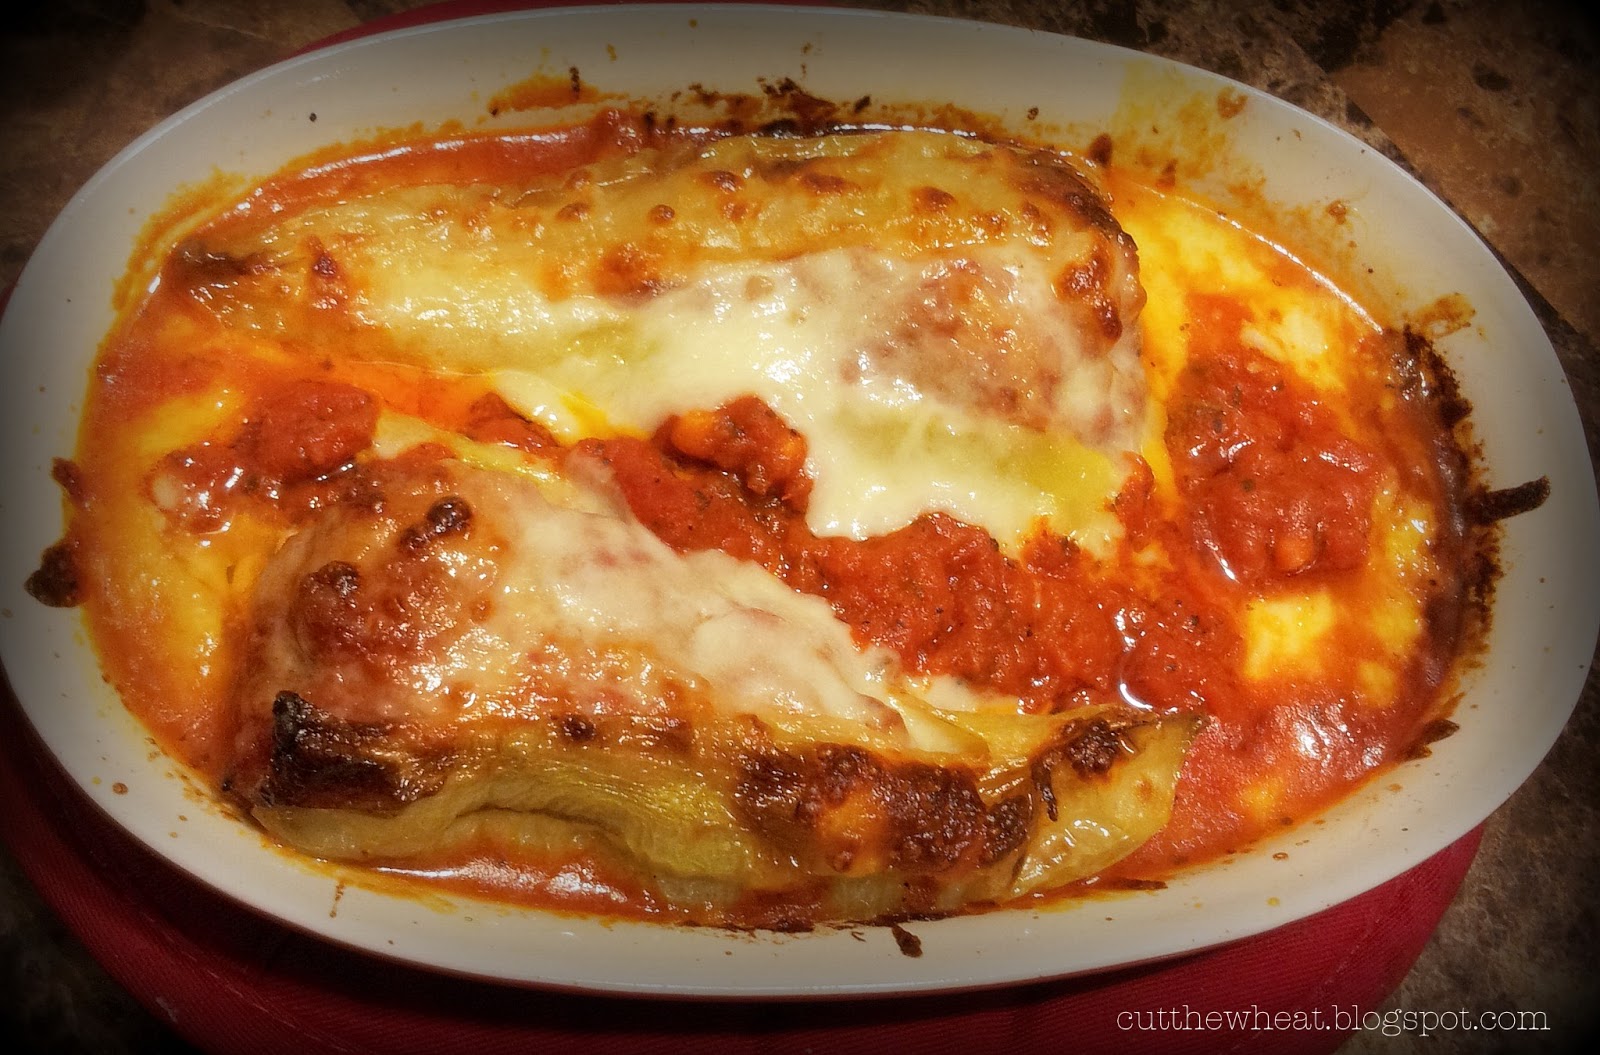 Hot Sausage Stuffed Banana Peppers with Tomato Sauce and Melted Cheese